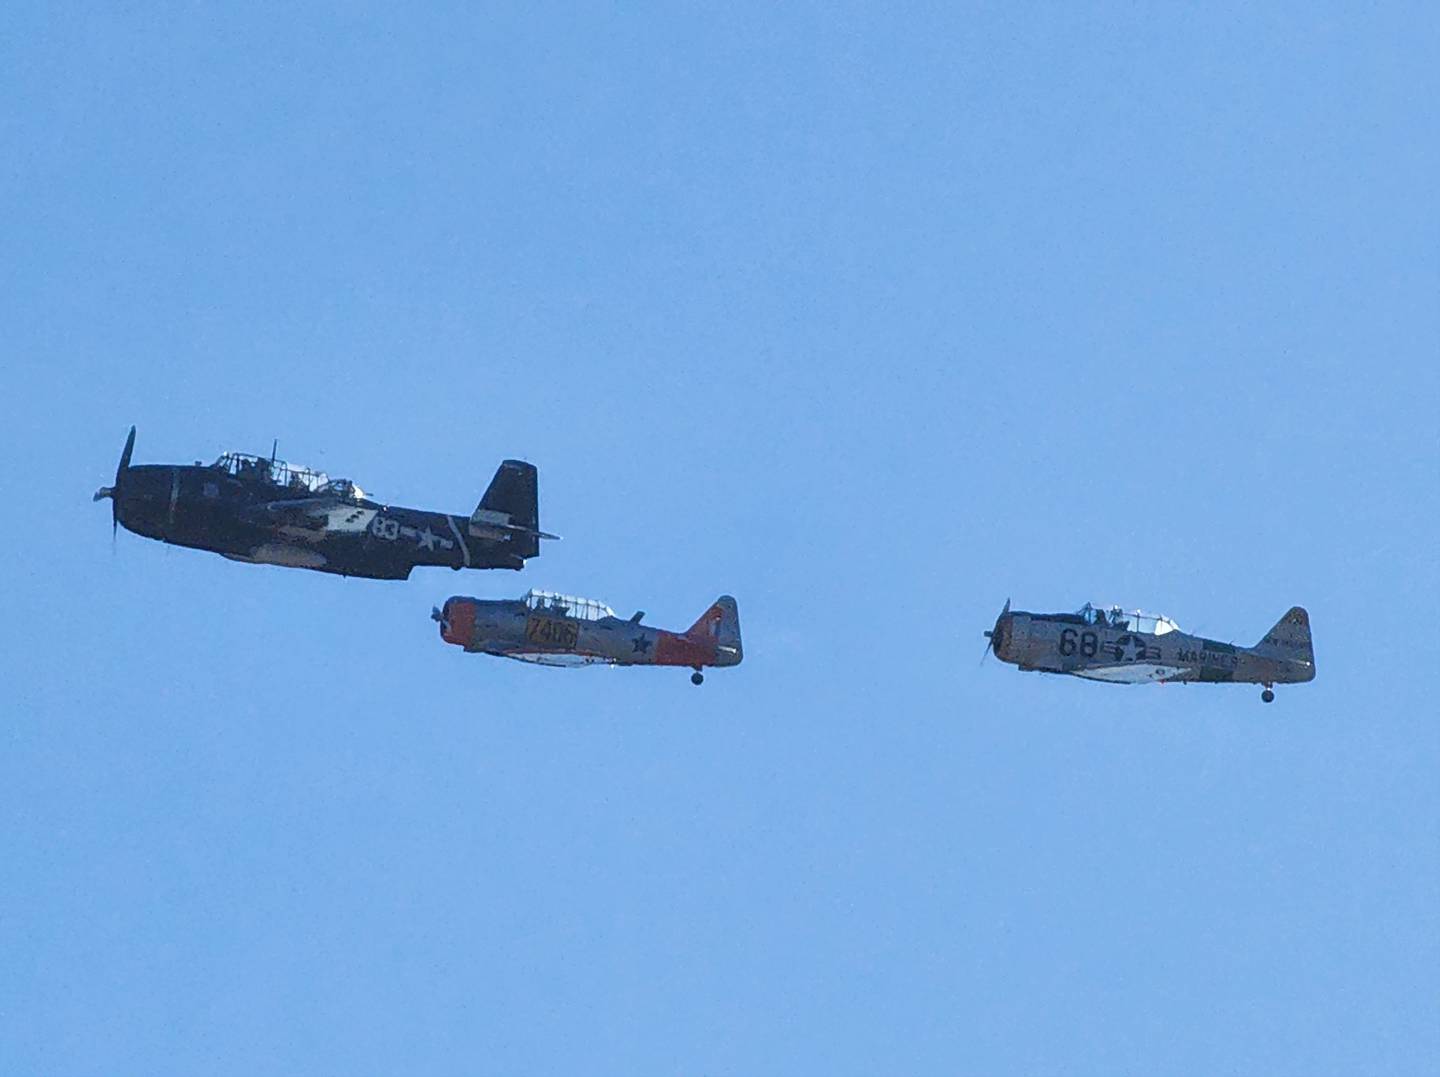 Multiple TBM Avengers performed a fly-over to close out the day’s events and put an end to the 43rd Annual Pearl Harbor Parade.